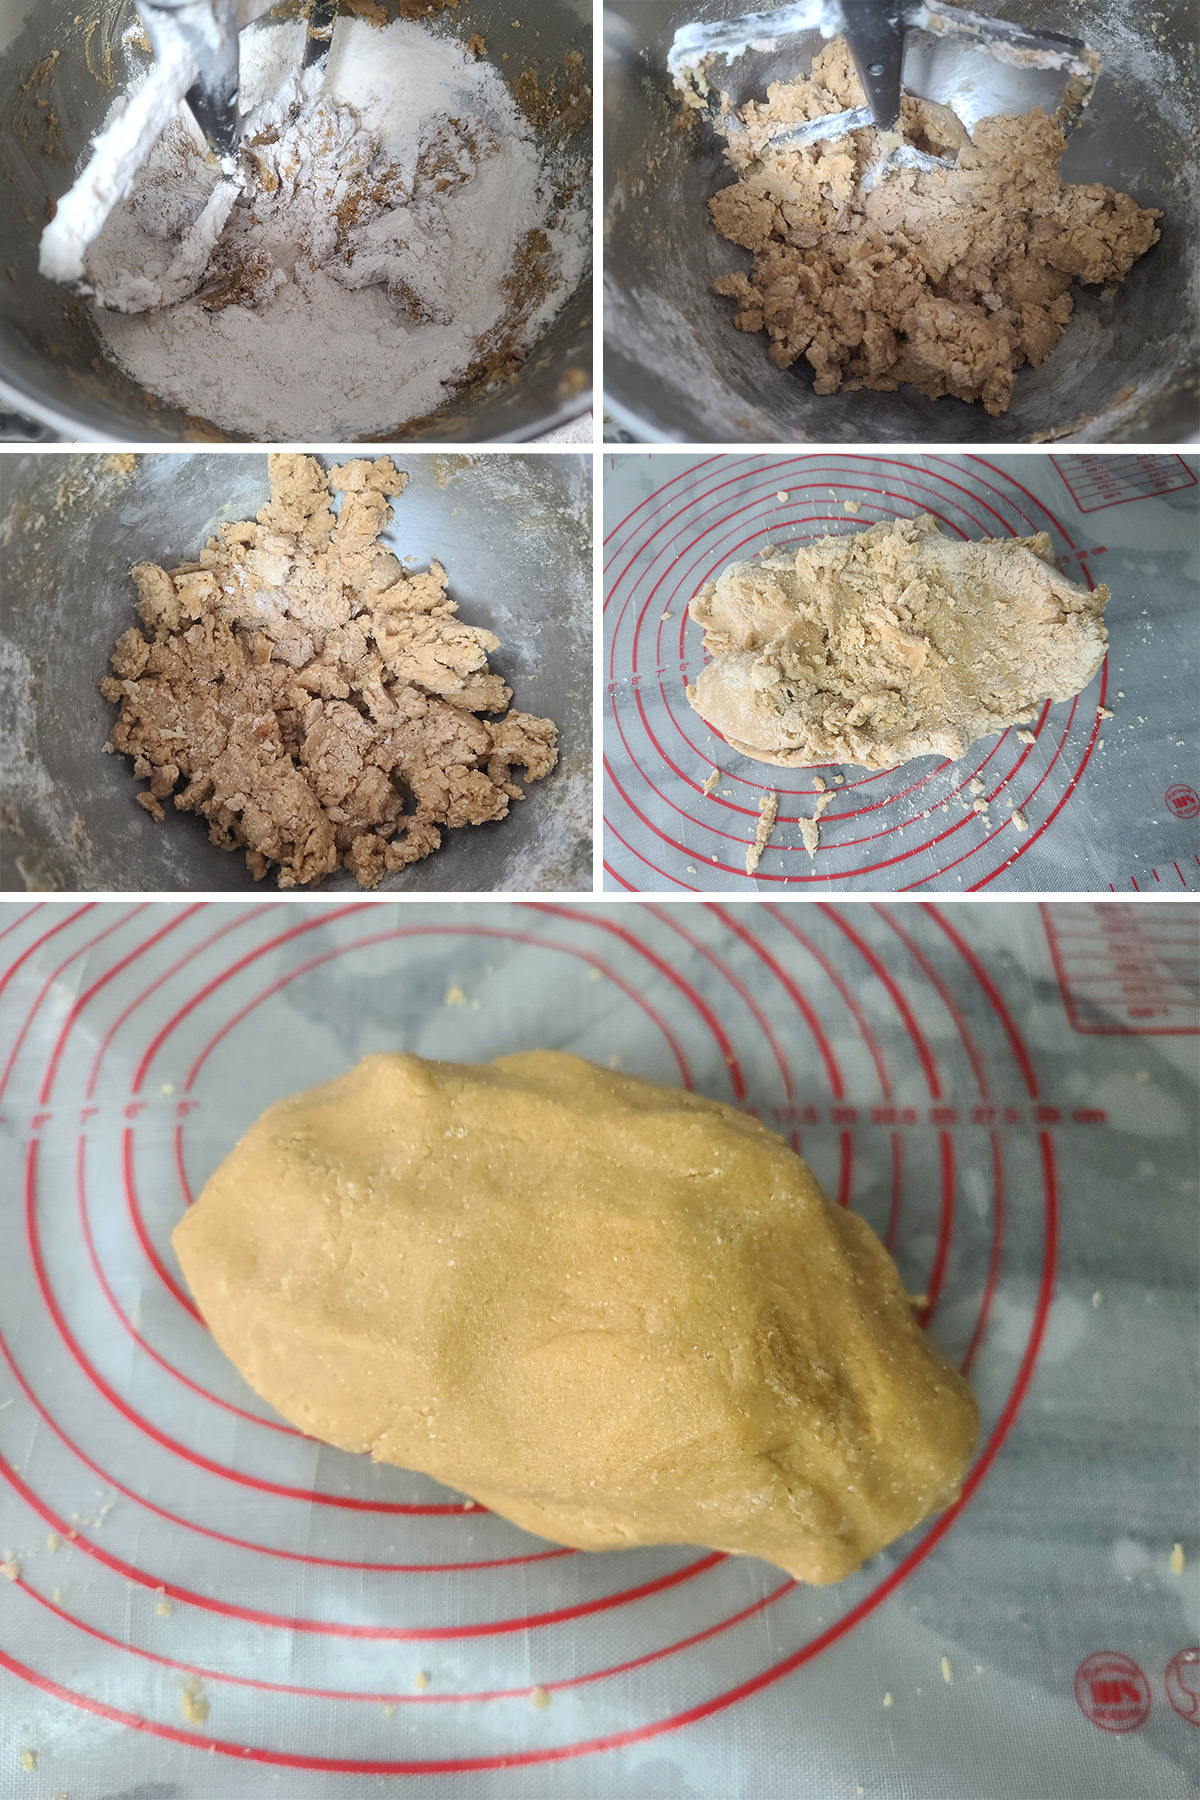 A 5 part image showing the dry ingredients being added to the mixer bowl and combined to make gluten free shortbread dough.